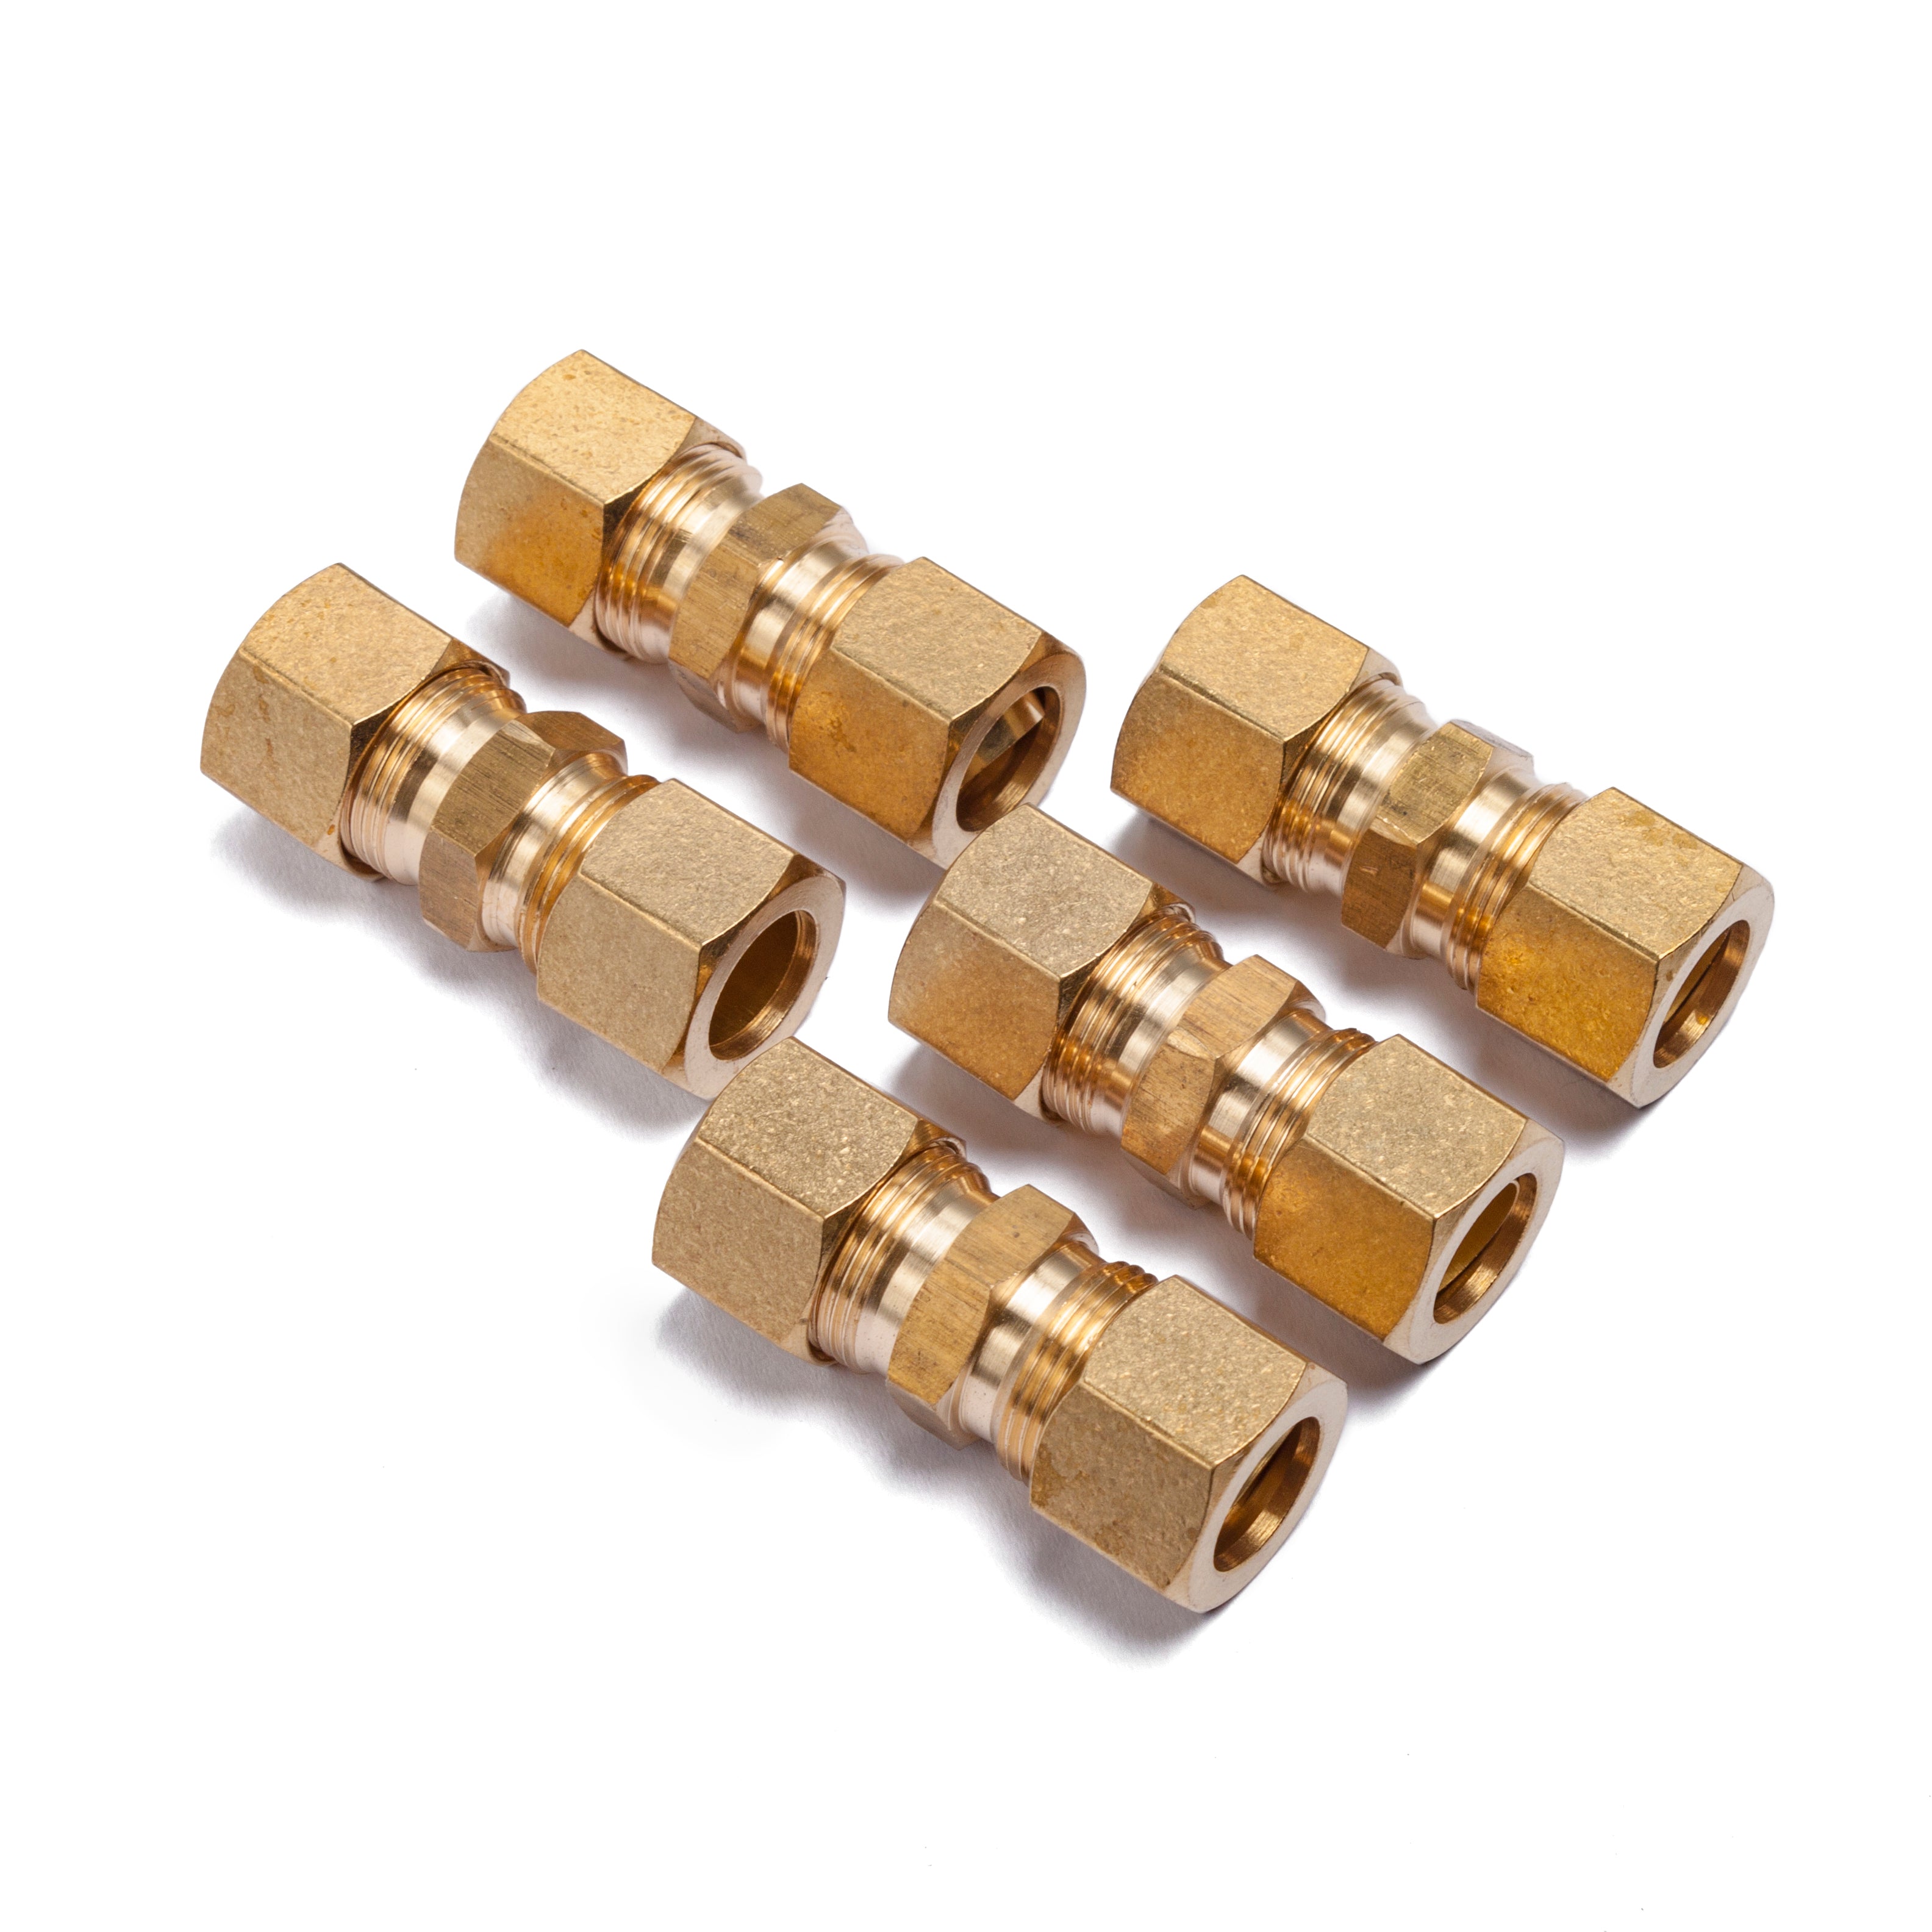 LTWFITTING 7/16 OD Compression Union,Brass Compression Fitting(Pack of 5)